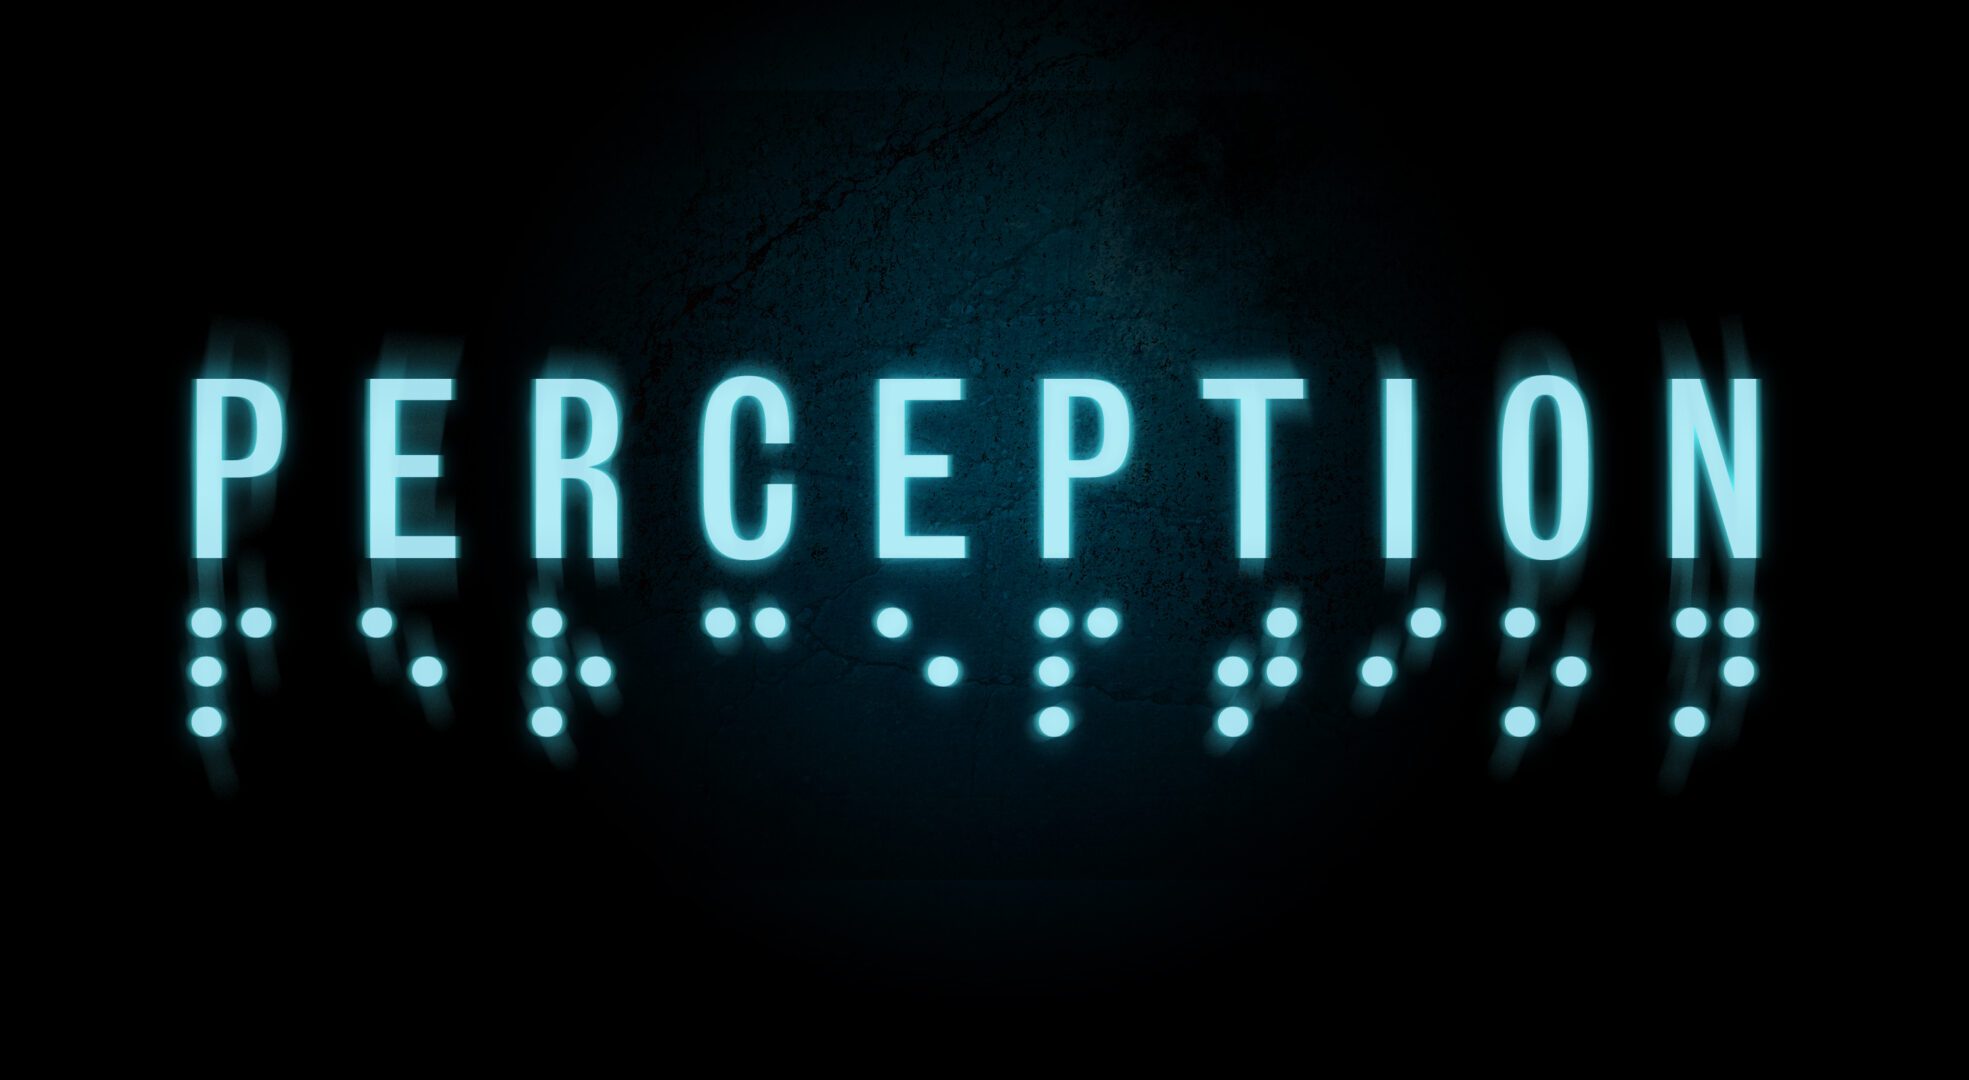 Perception Is A Wonderful Mix Of Atmosphere and Characterization